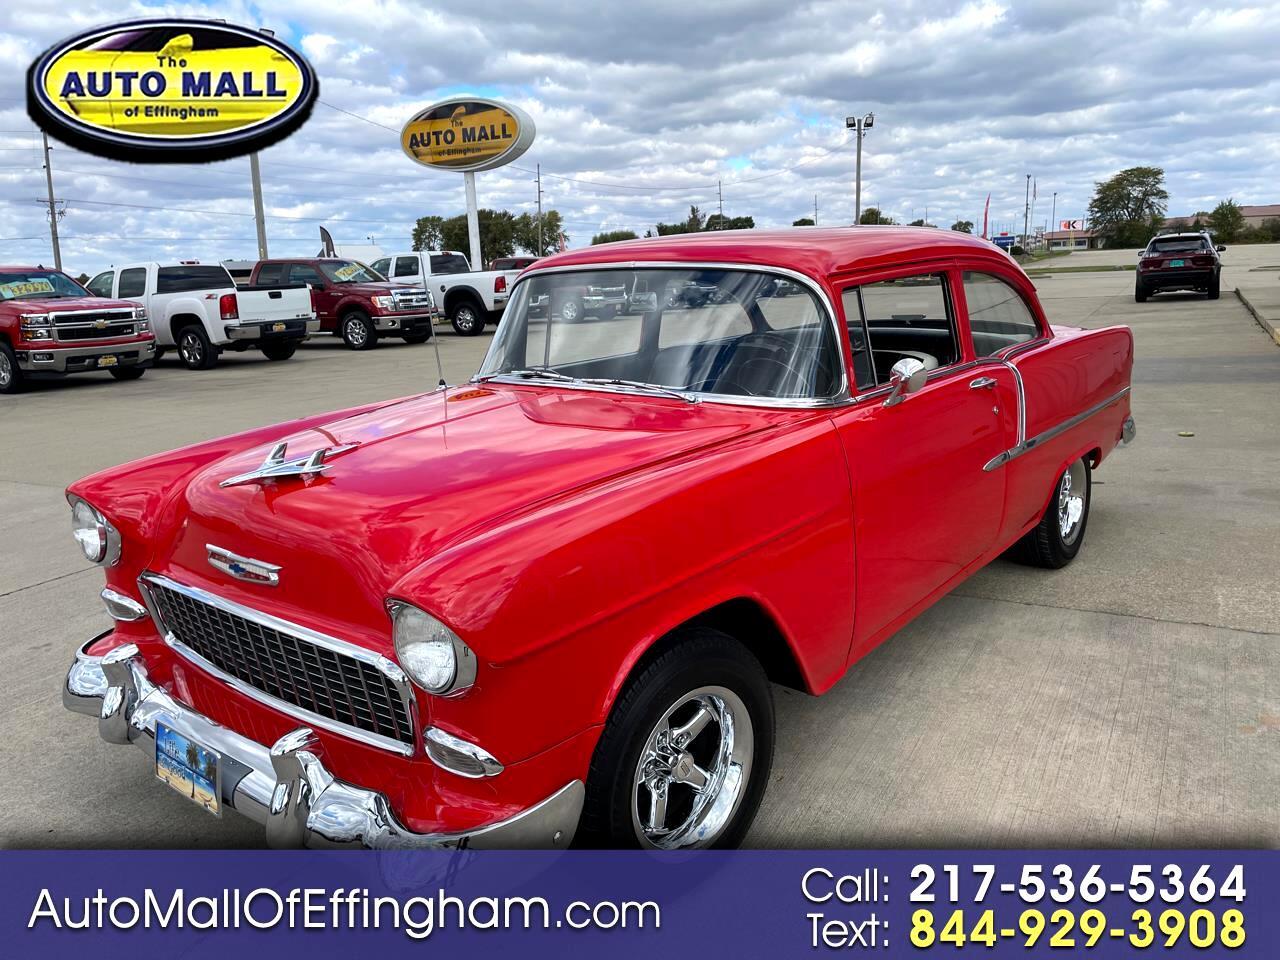 For Sale: 1955 Chevrolet 210 in Effingham, Illinois for sale in Effingham, IL